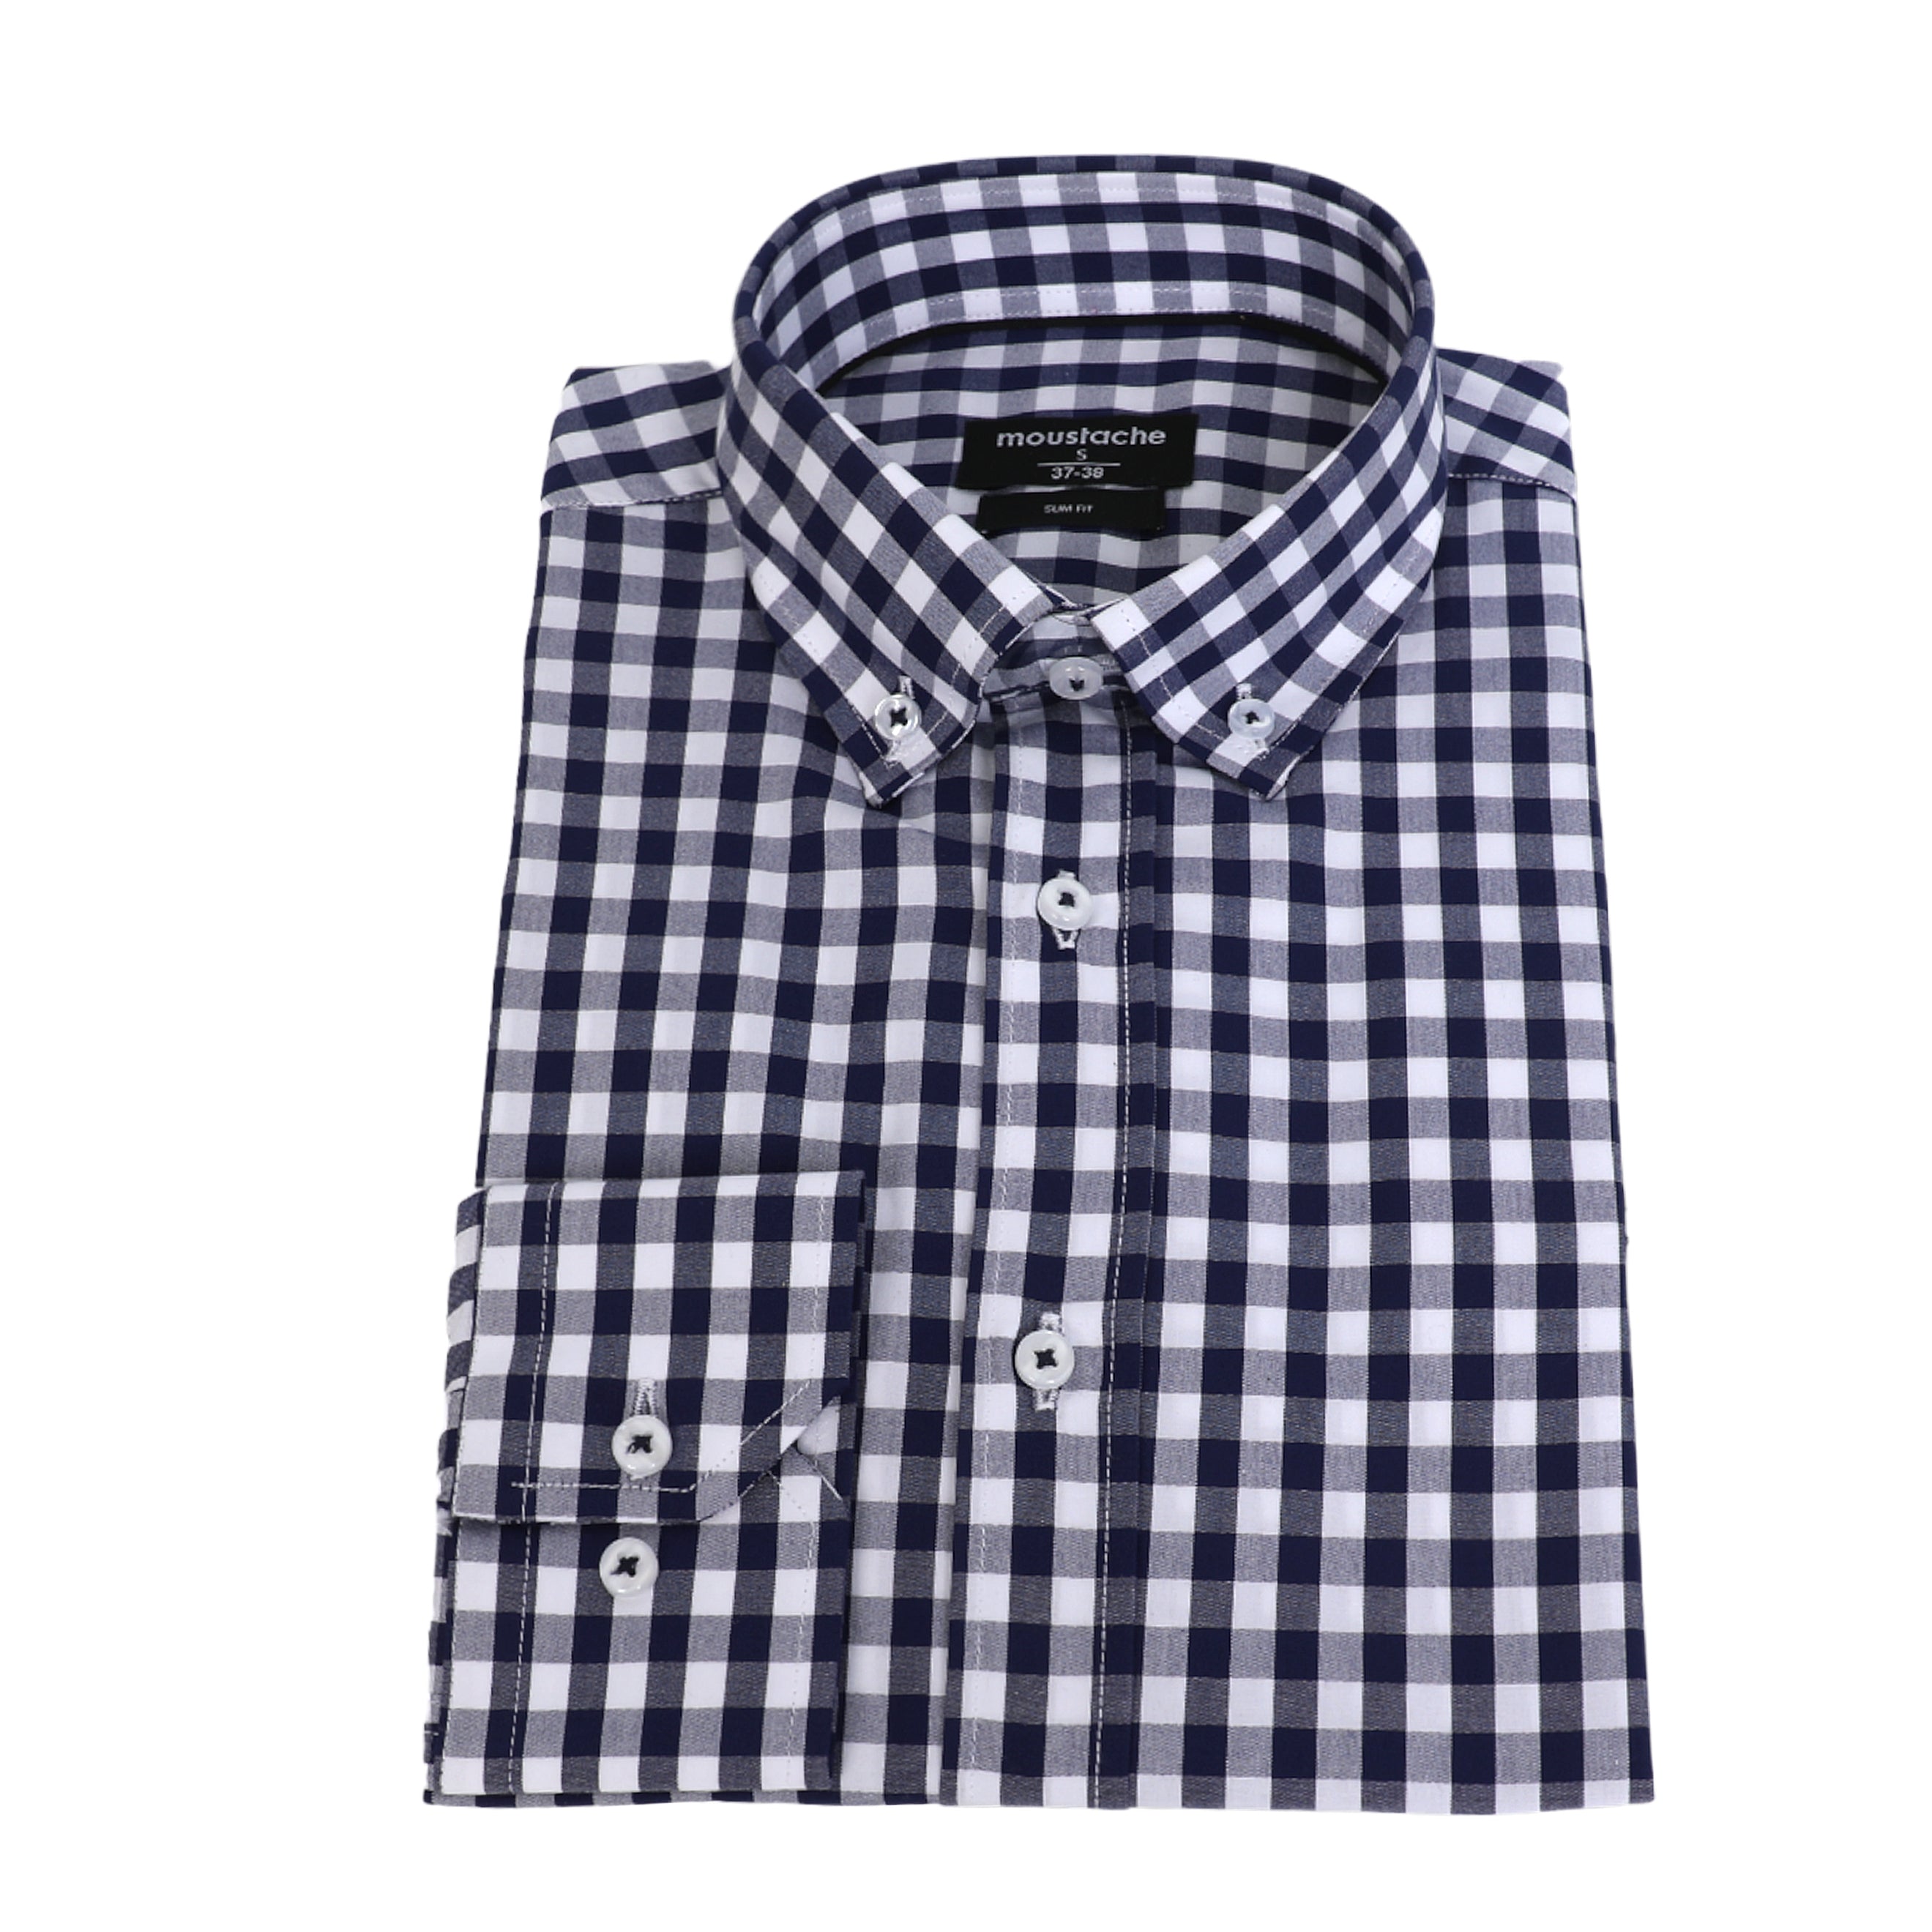 Moustache's Slim Fit Navy Patterned Casual Shirt